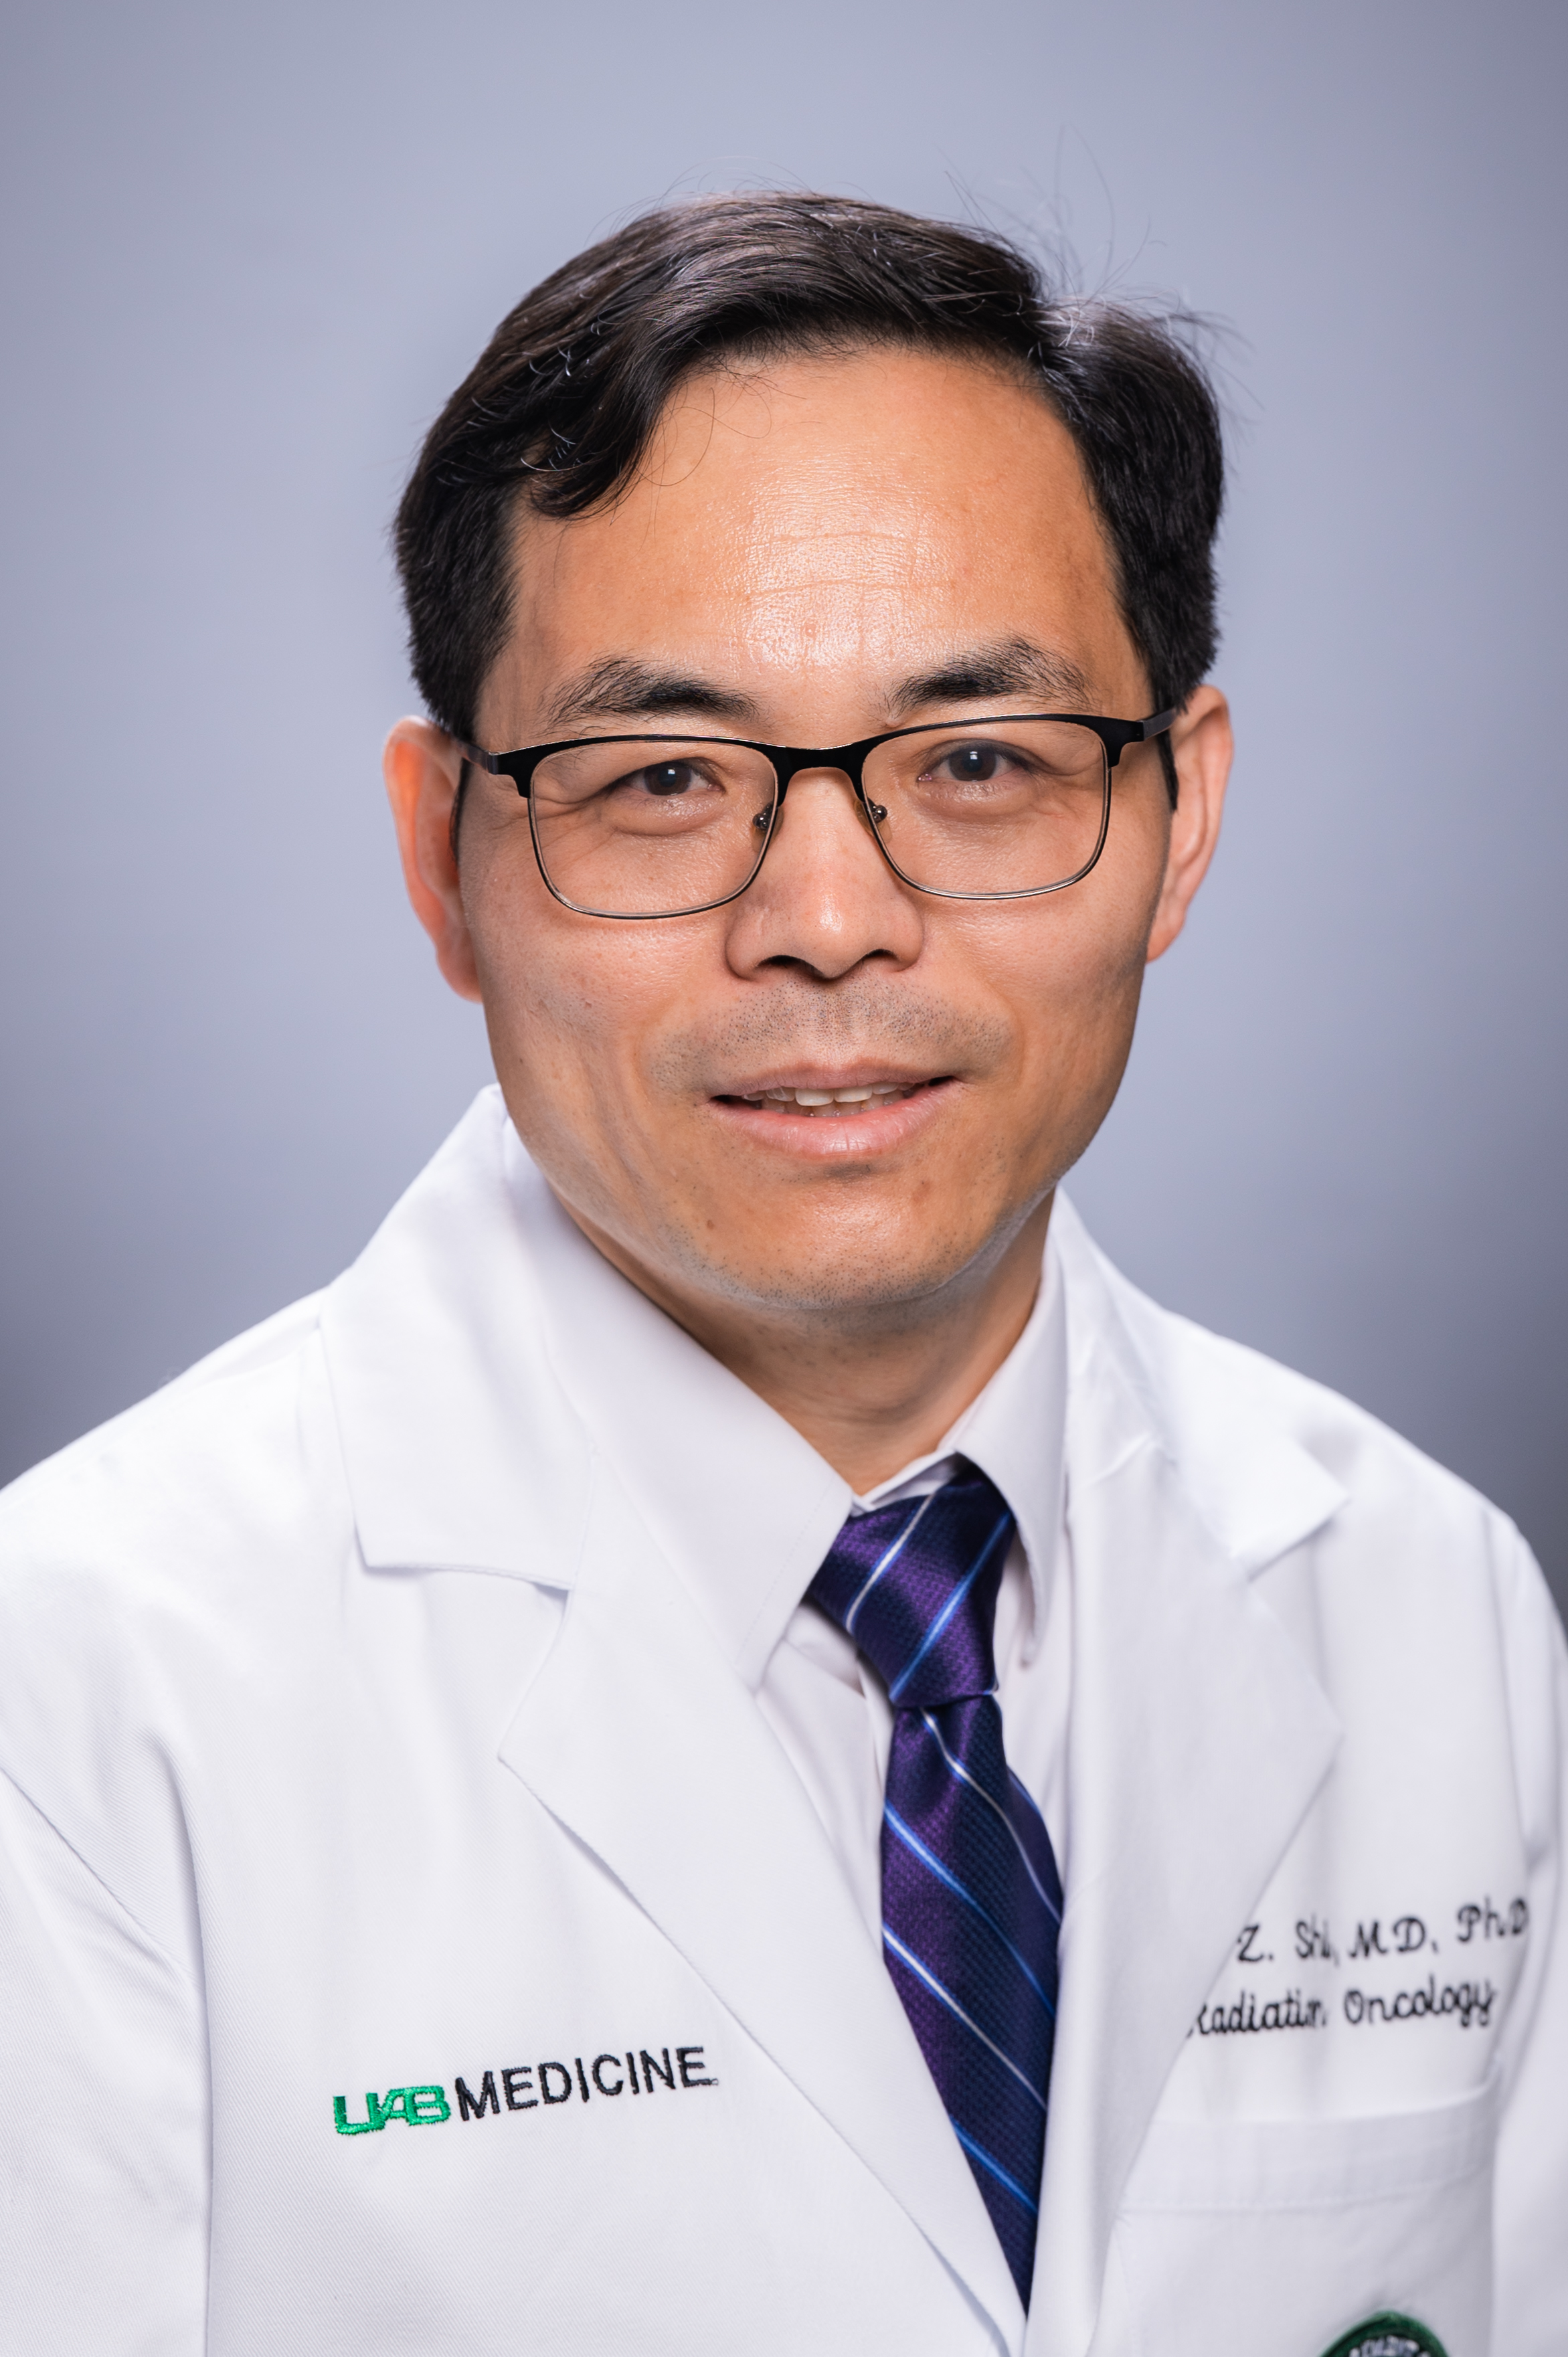 Headshot of Dr. Lewis Shi, PhD (Associate Professor, Radiation Oncology - Preclinical Research) in white medical coat, September 2022.